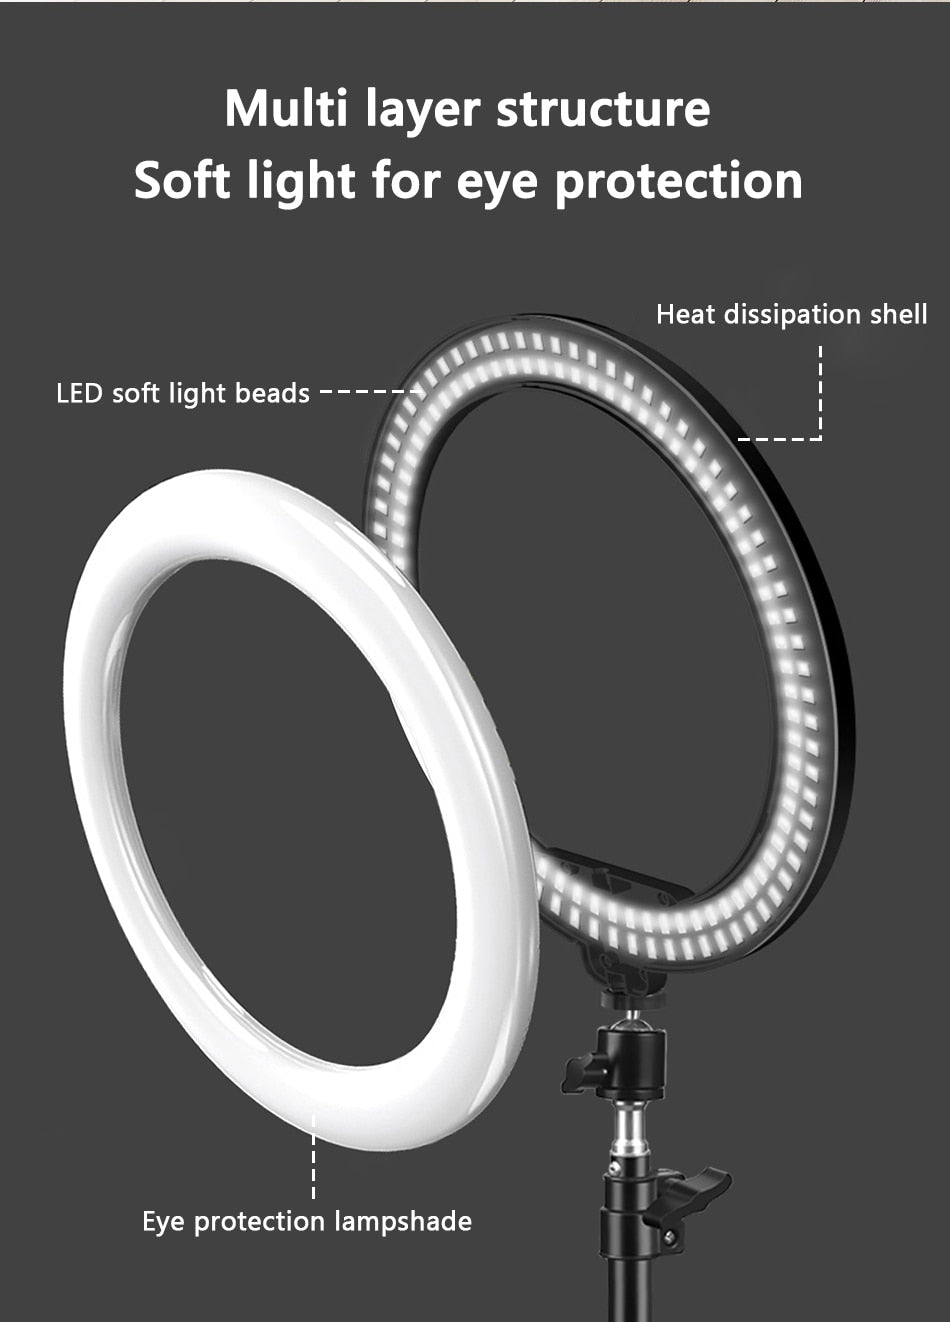 10" Selfie Ring Light - Tripod Optional. Perfect for Video Recording and Live Broadcast